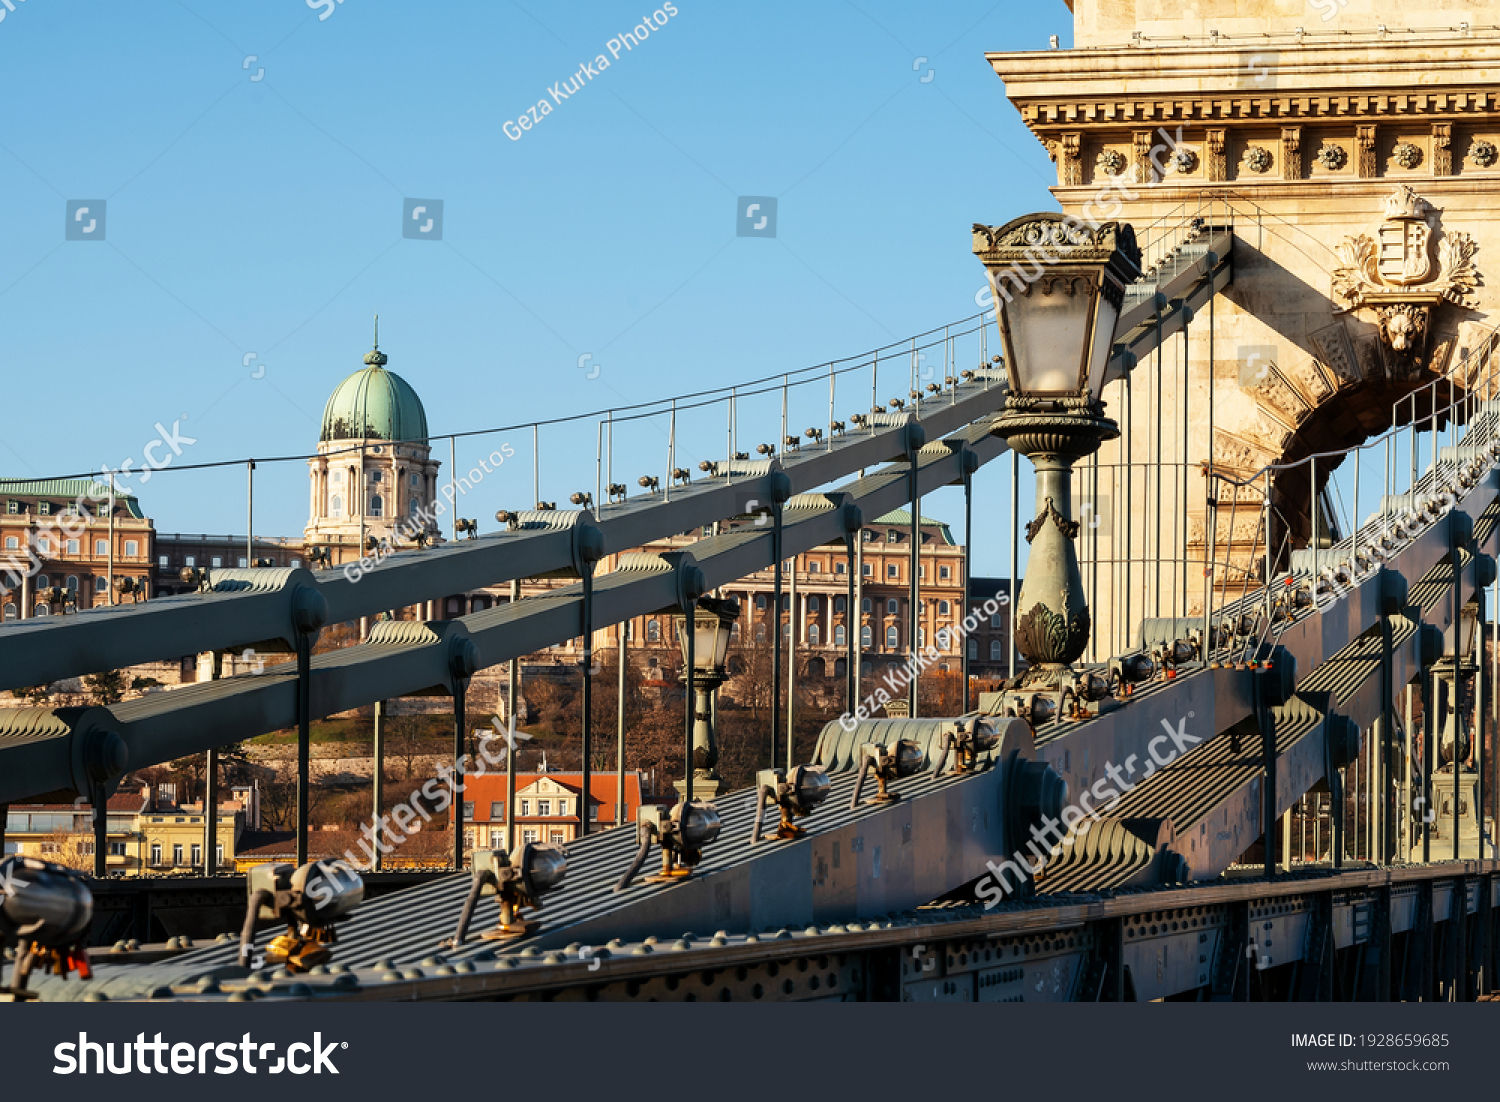 The Chain bridge before the renovation works begin. The oldest bridge in Hungary which famous tourist attraction Rusted, poor condition but renewing in 2021 #1928659685